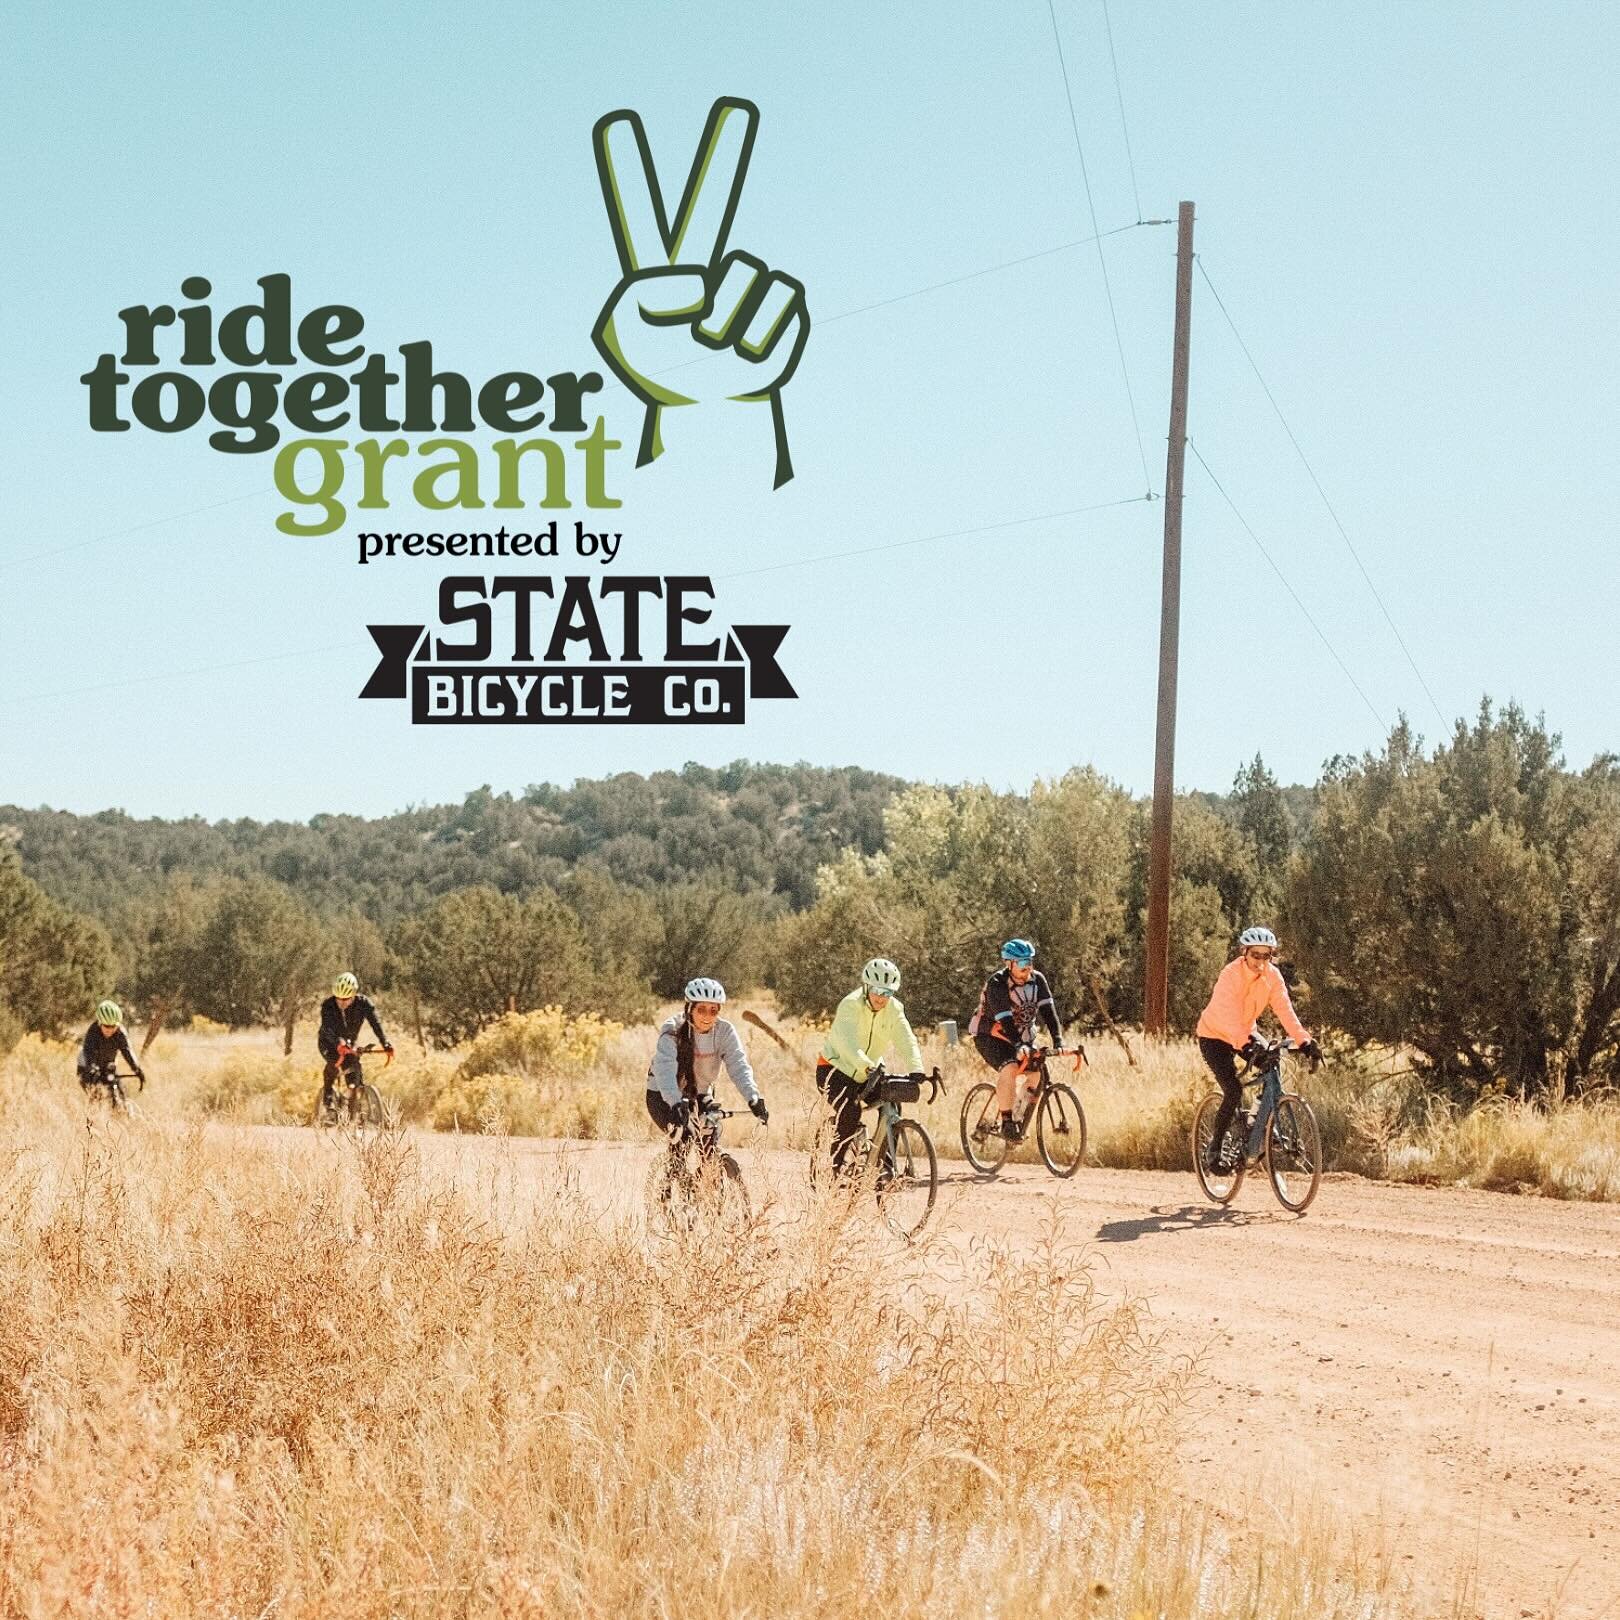 IT&rsquo;S ALIVE! Ride Together Grant applications are OPEN. We launched the Ride Together Grant with State Bicycle Co. to break down financial barriers to riding with us in October and accessing reliable equipment. We&rsquo;ll be awarding ten free e